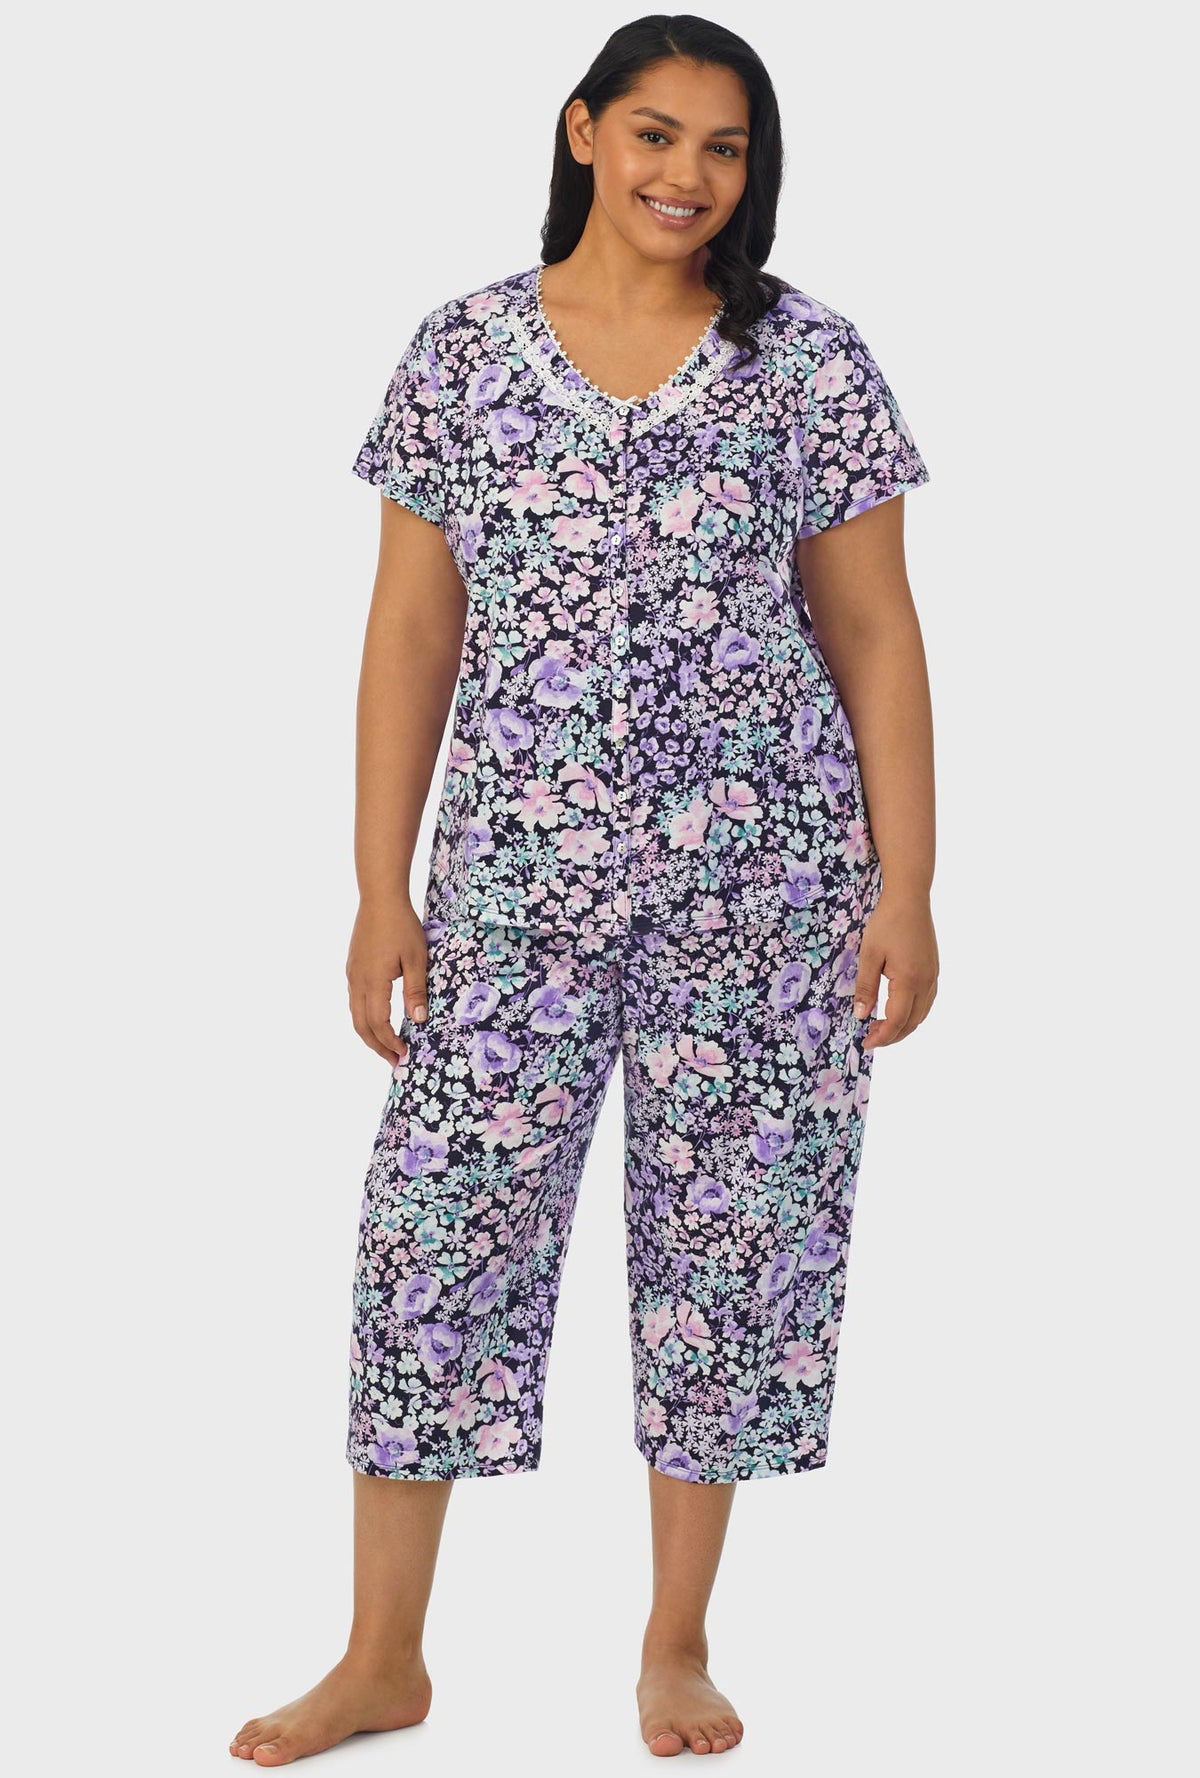 A lady wearing navy short sleeve capri pant plus size pj set with midnight blue floral print.